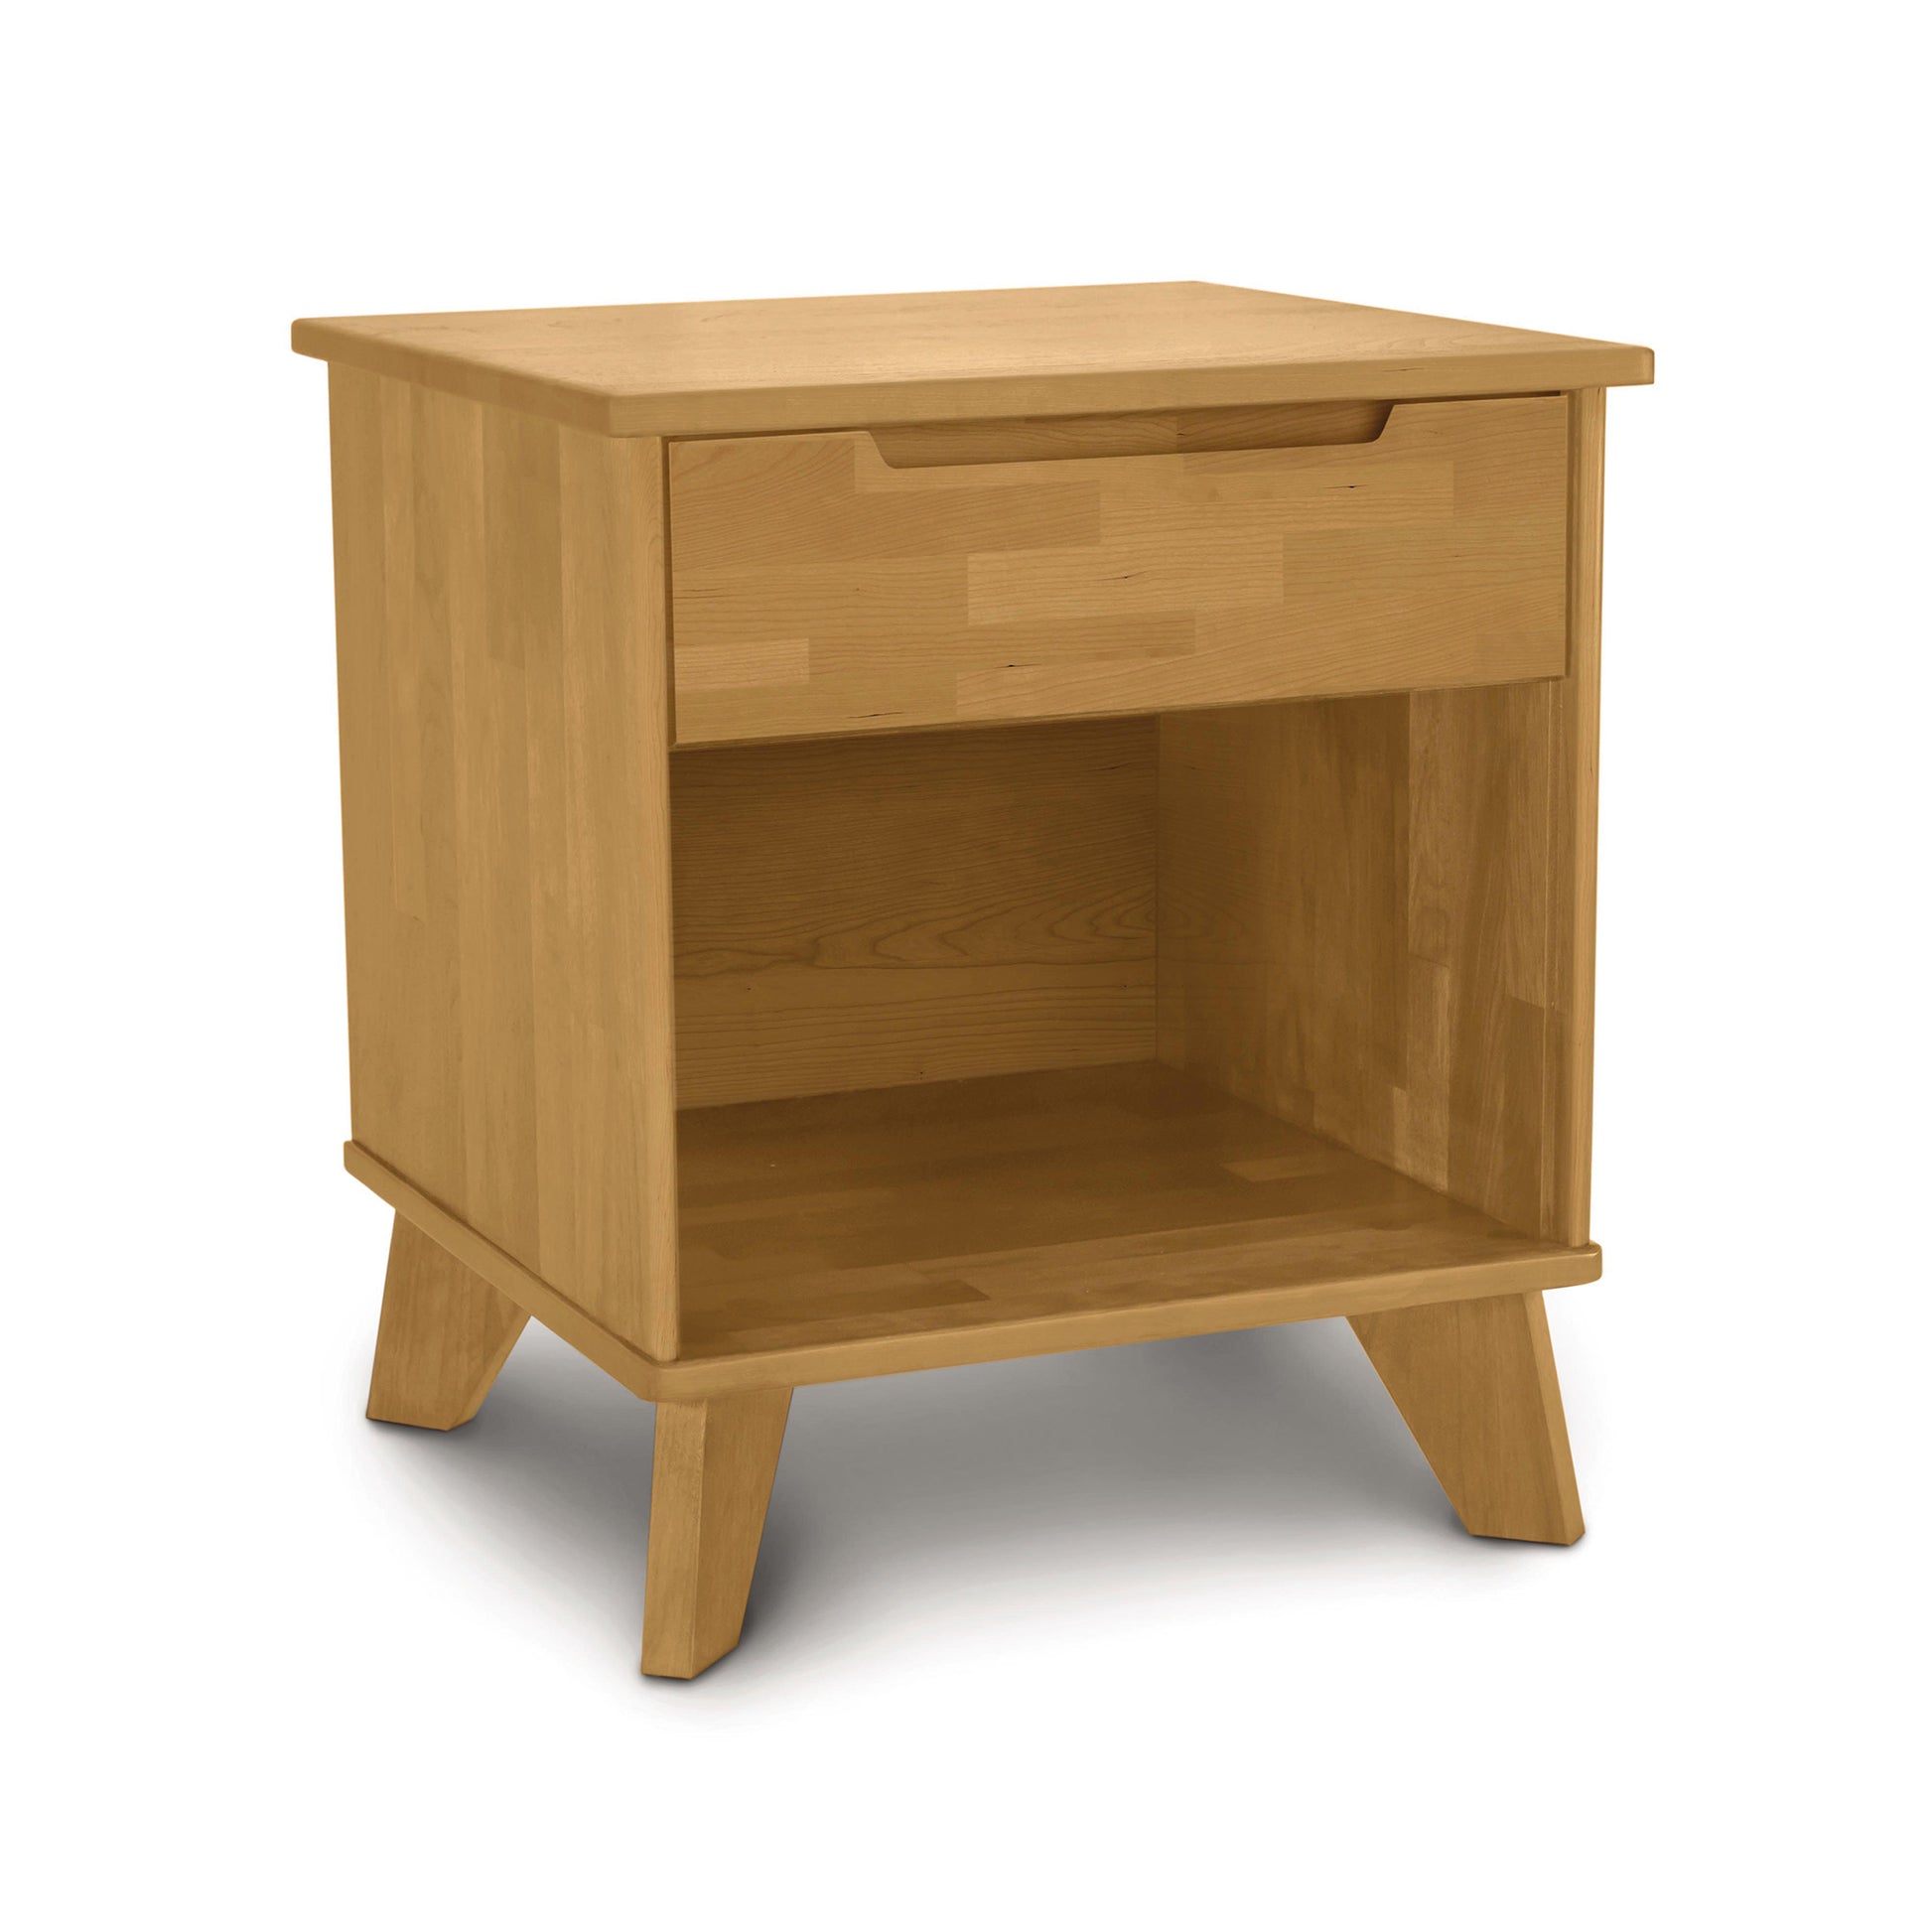 A Linn 1-Drawer Enclosed Shelf Nightstand by Copeland Furniture with a single drawer and an open shelf on a white background.